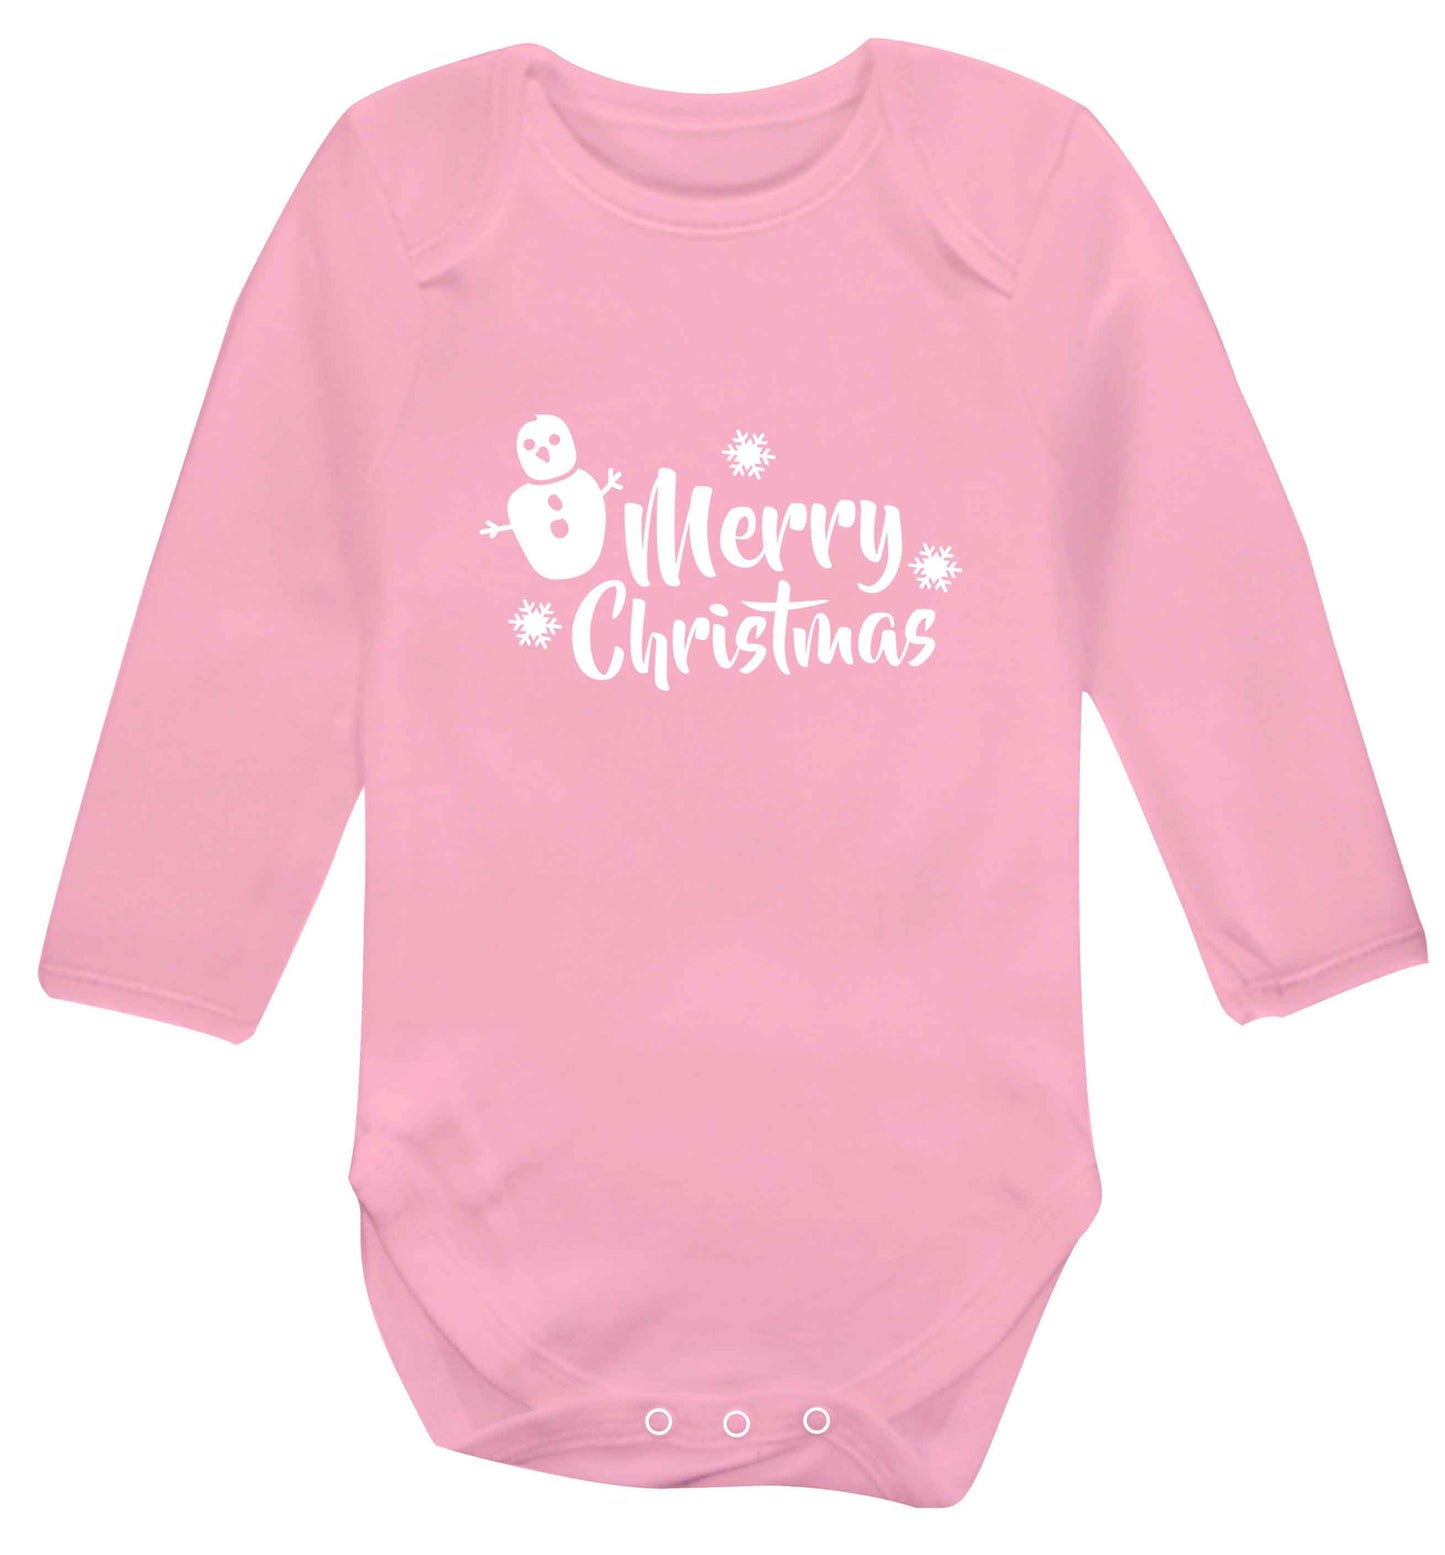 Merry Christmas - snowman baby vest long sleeved pale pink 6-12 months